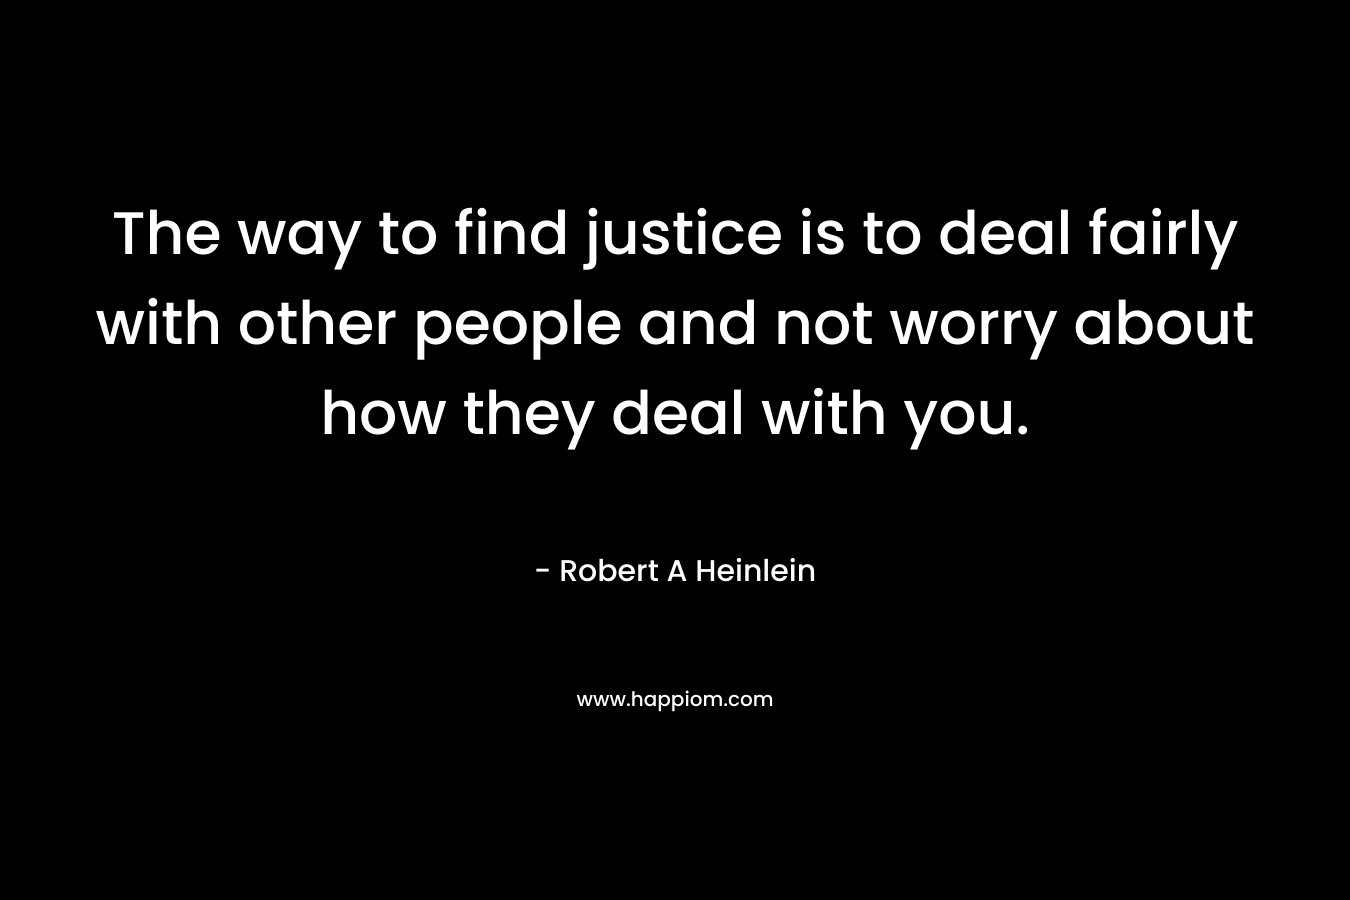 The way to find justice is to deal fairly with other people and not worry about how they deal with you.